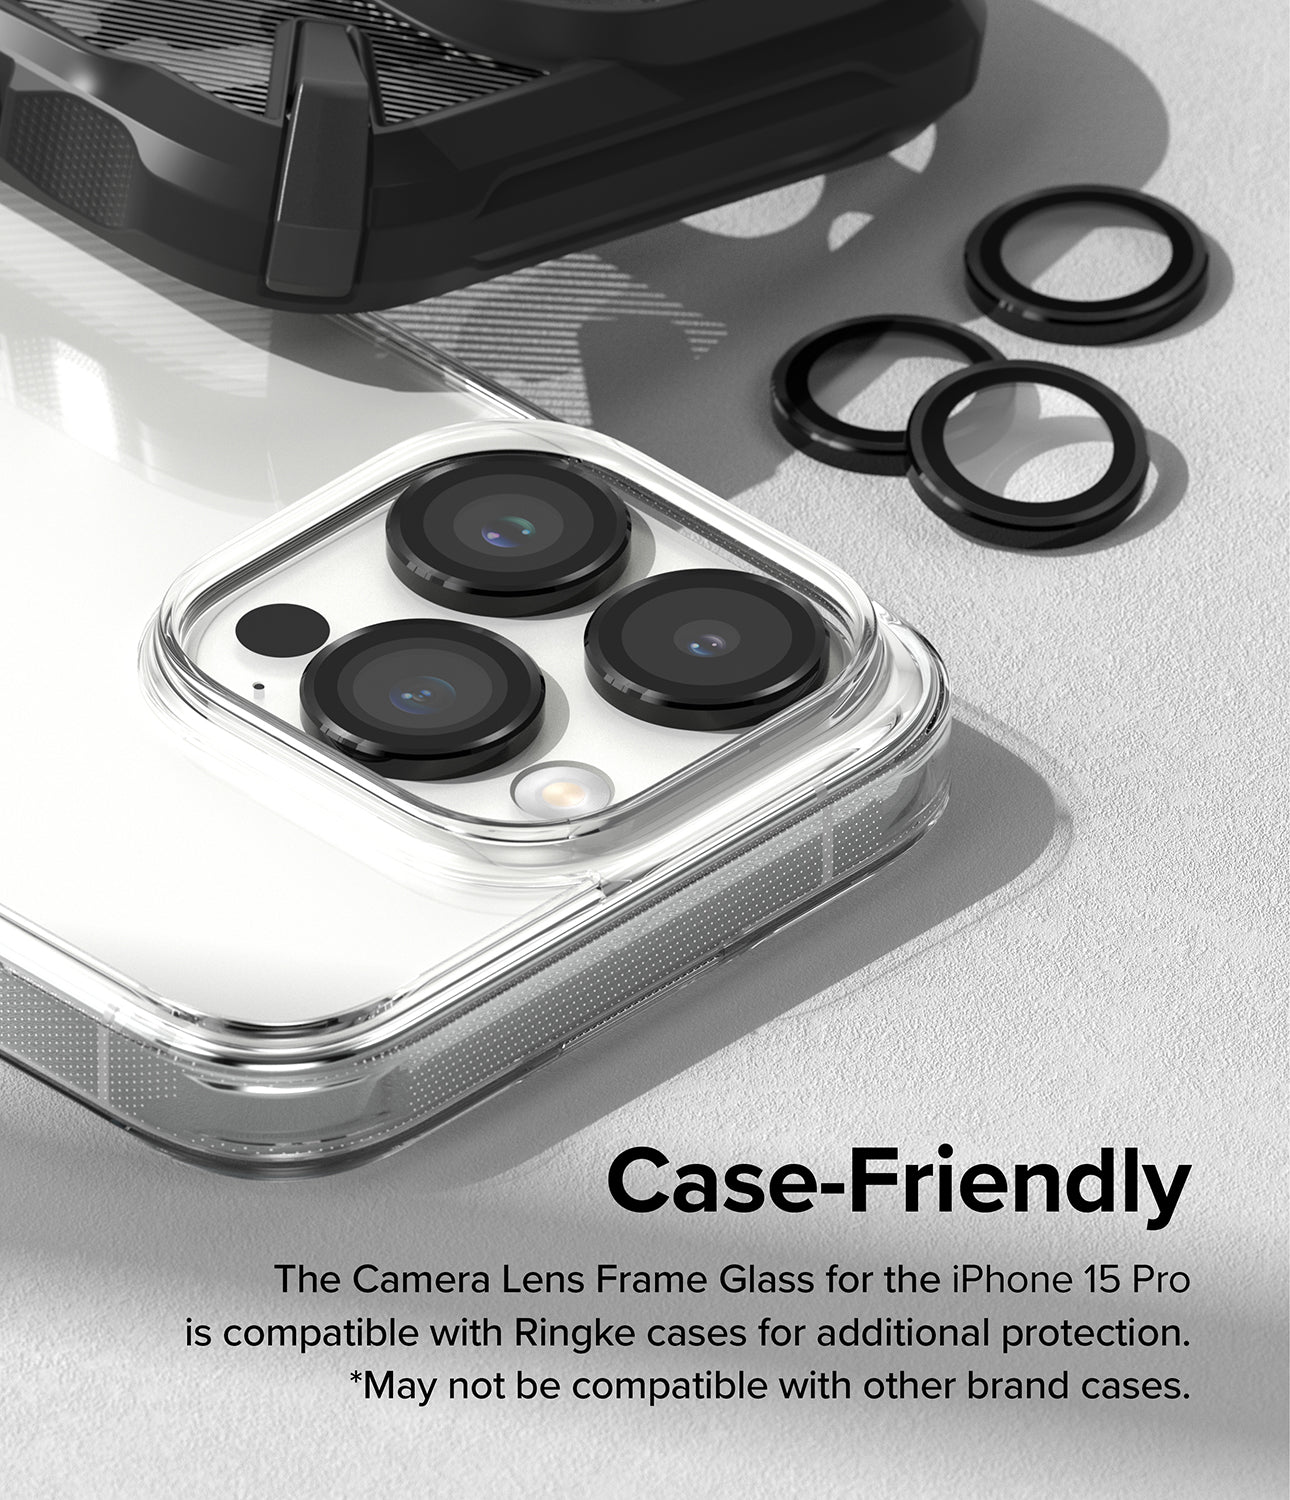 iPhone 15 Pro | Camera Lens Frame Glass - Case-Friendly. The Camera Lens Frame Glass for the iPhone 15 Pro is compatible with Ringke cases for additional protection. May not be compatible with other brand cases.